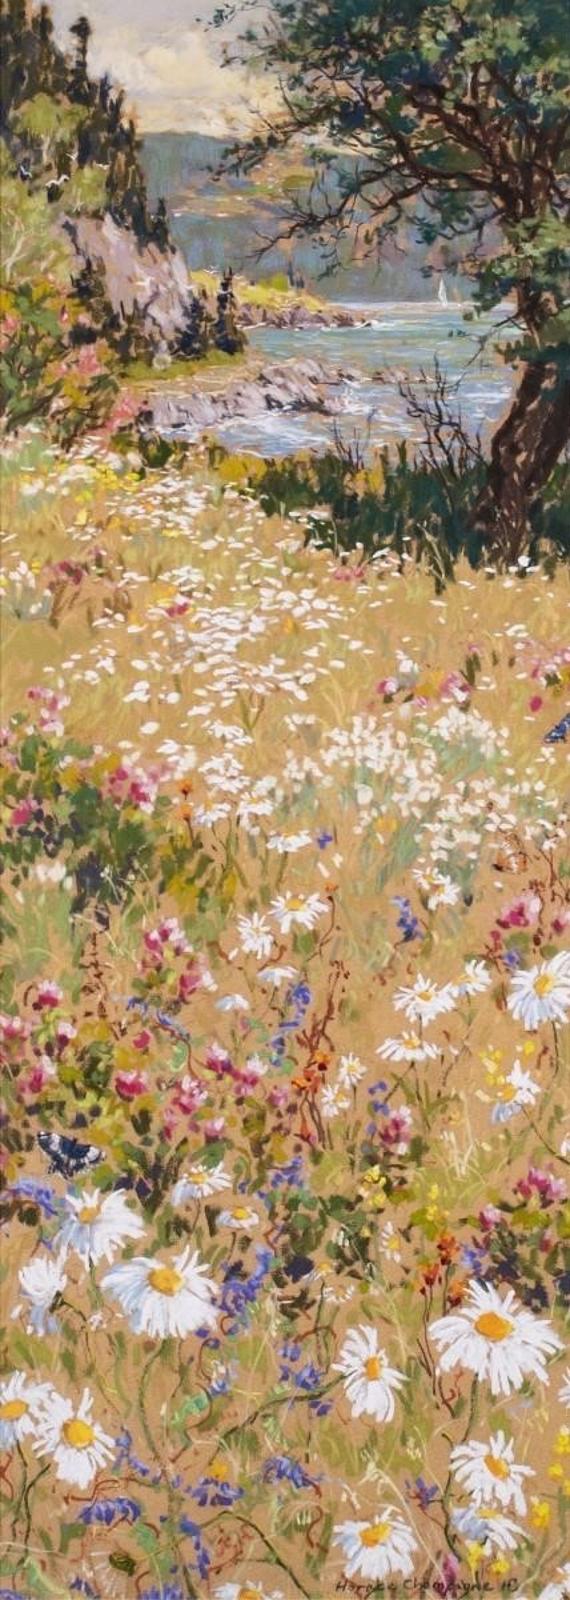 Horace Champagne (1937) - Summer, Daisies & Clover At St. Irenee; 1999